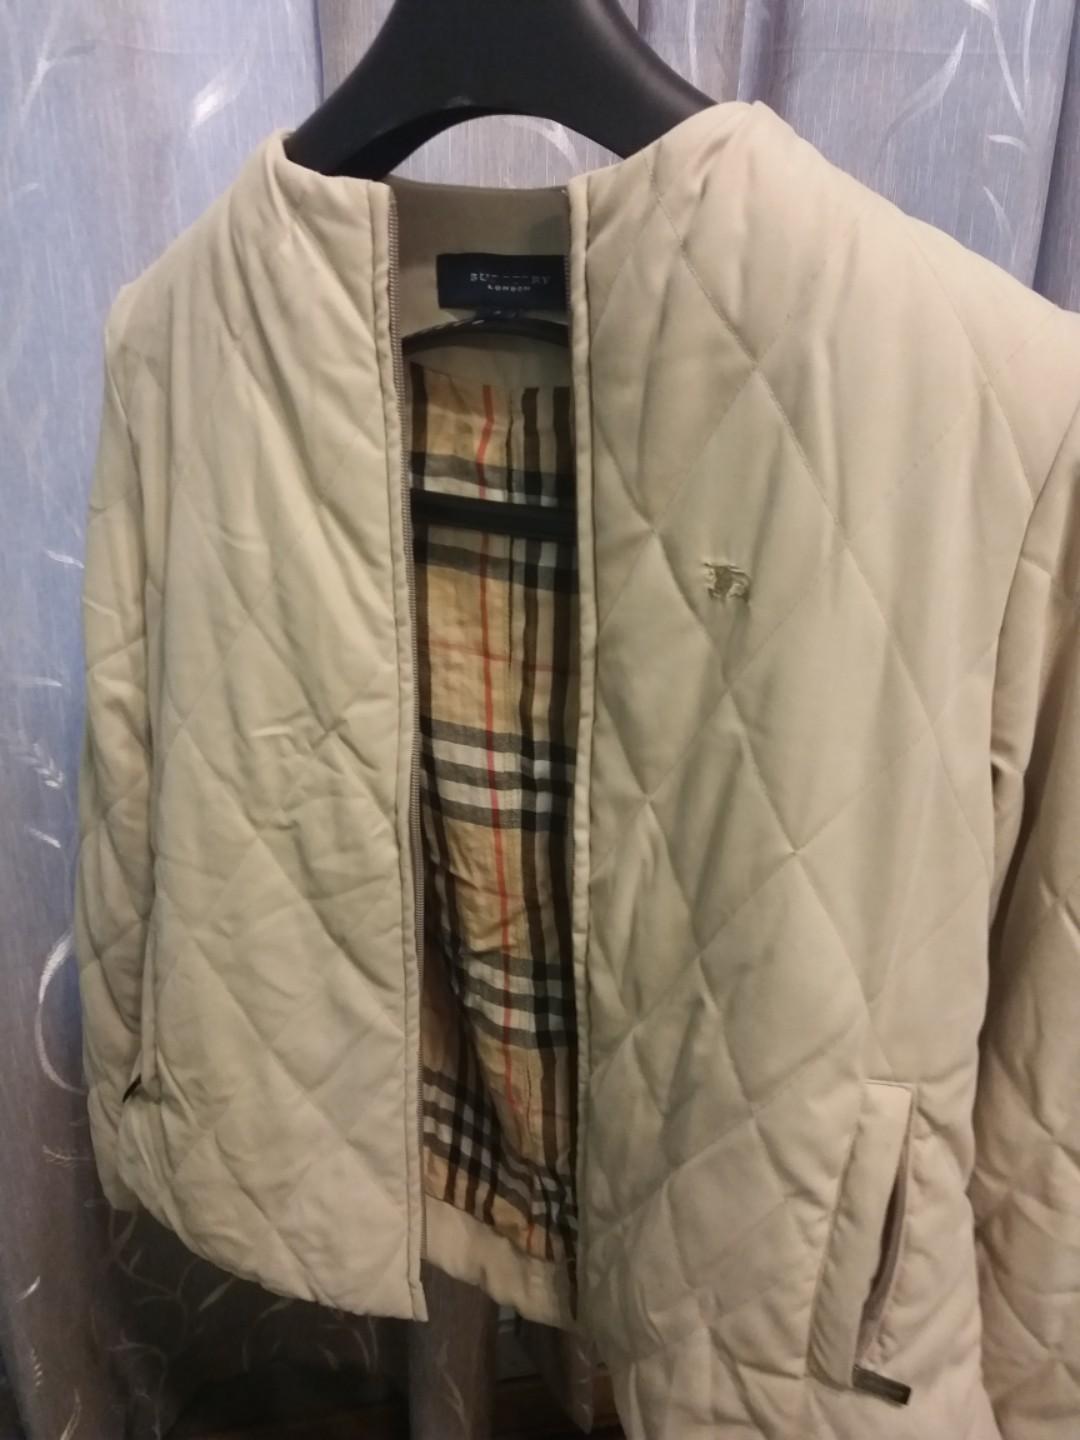 burberry quilted jacket sizing